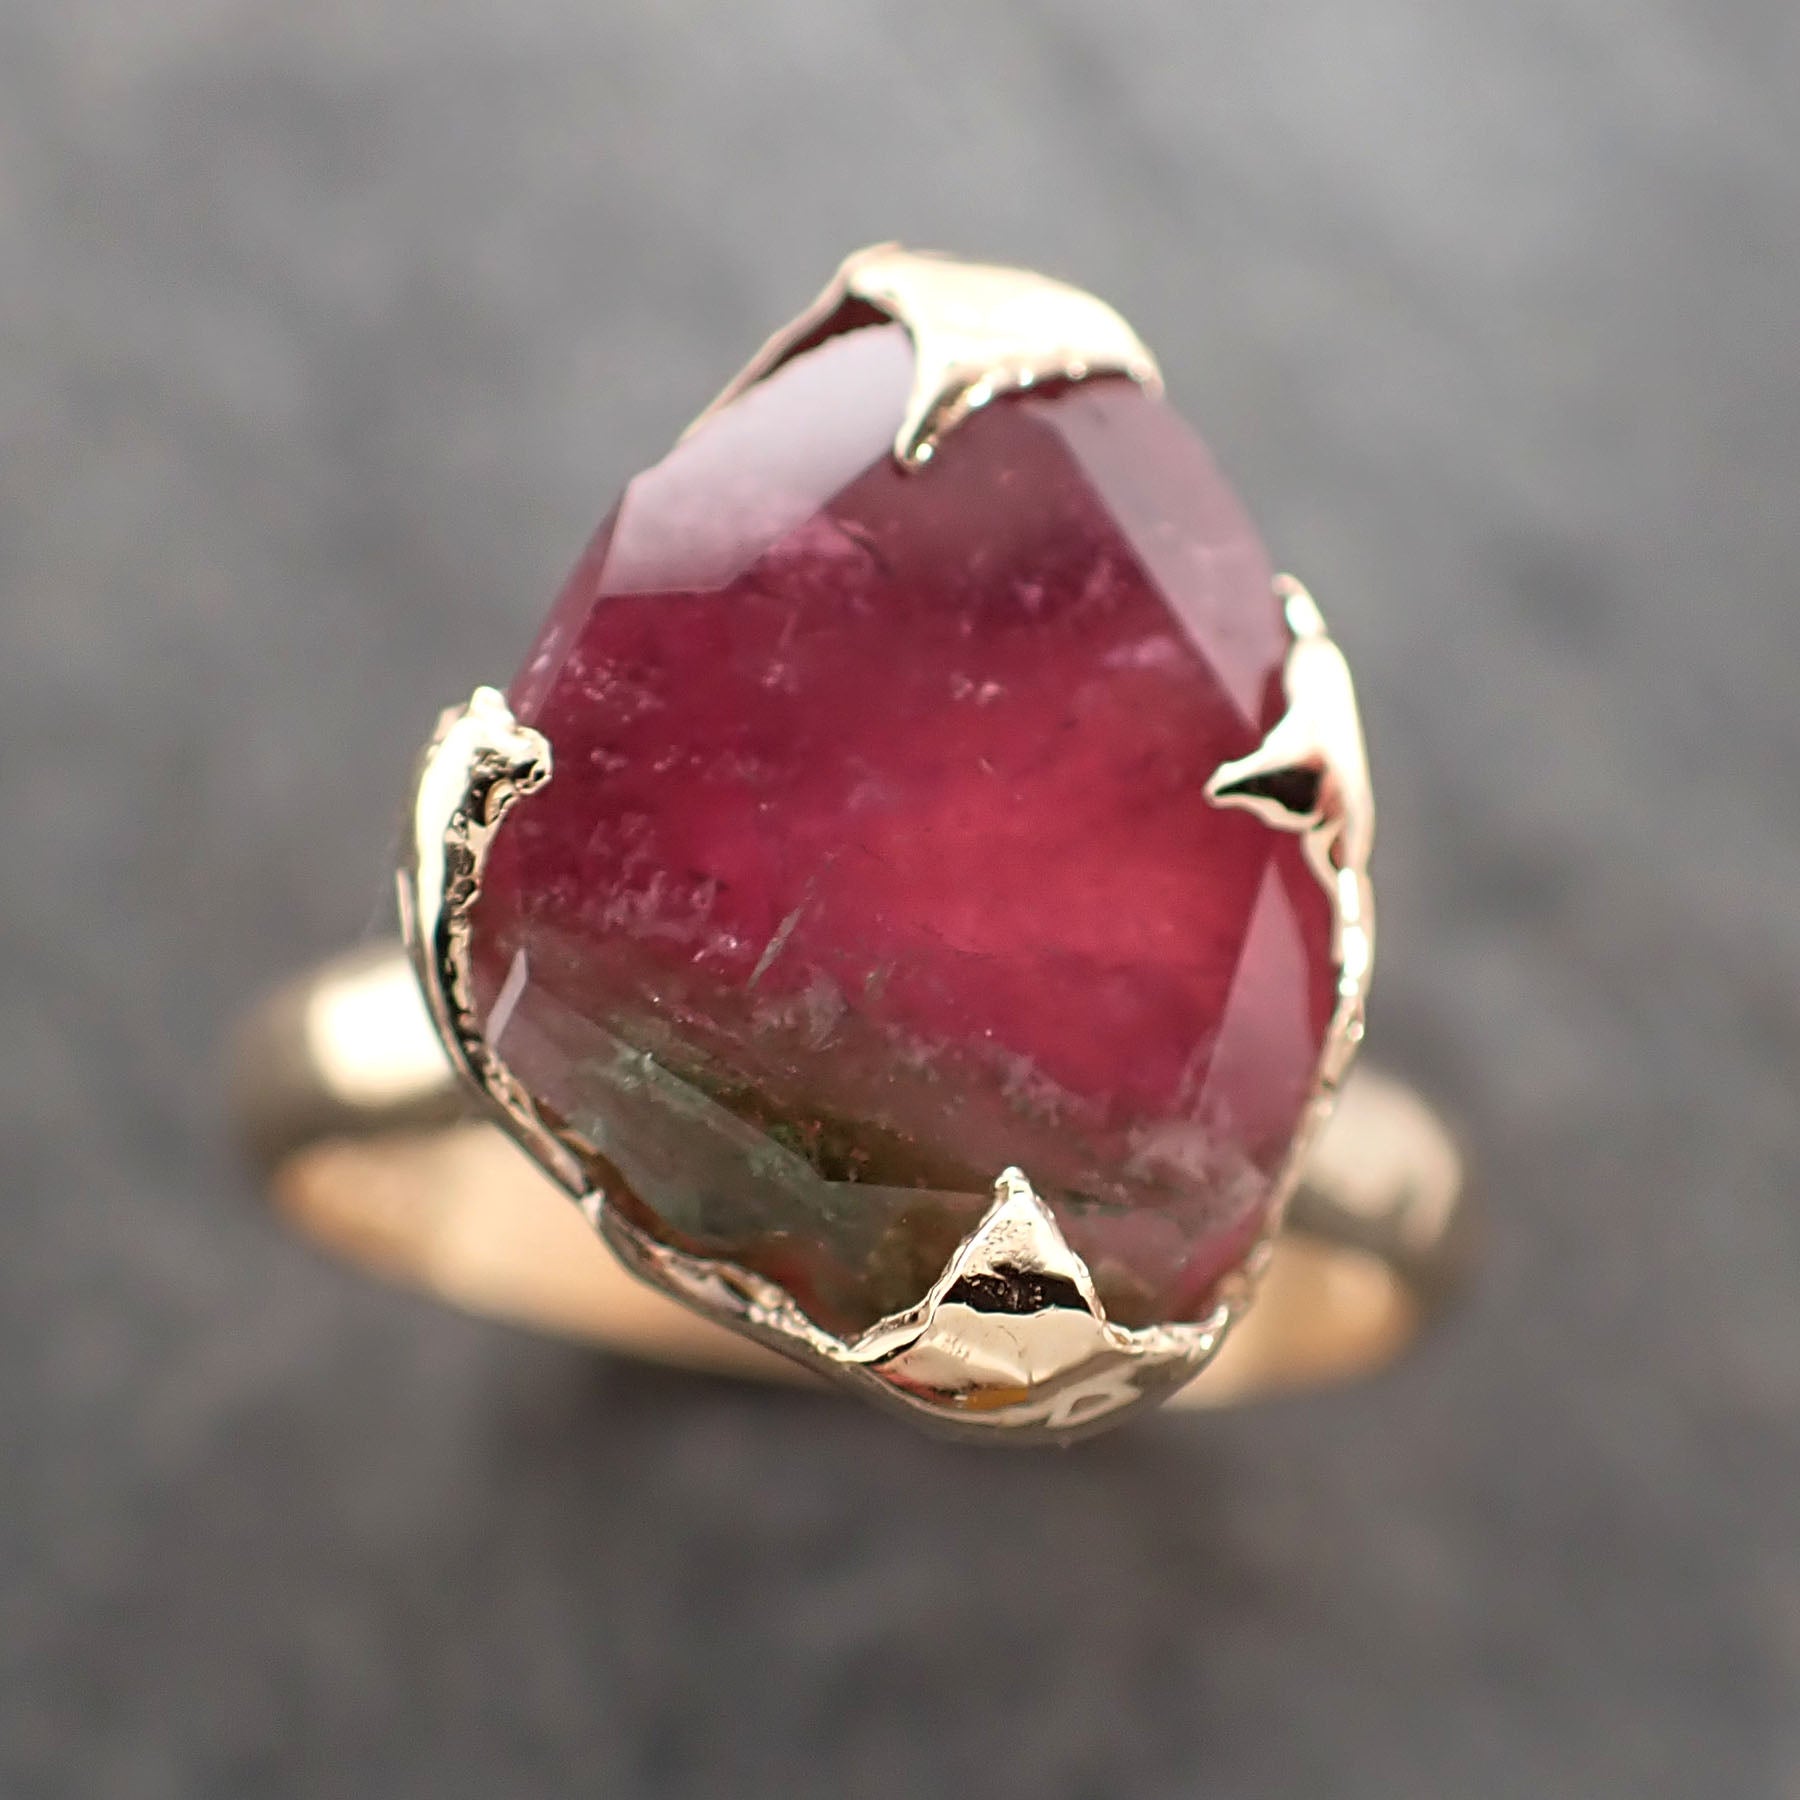 partially faceted watermelon tourmaline solitaire 14k gold engagement ring one of a kind gemstone ring byangeline 2382 Alternative Engagement